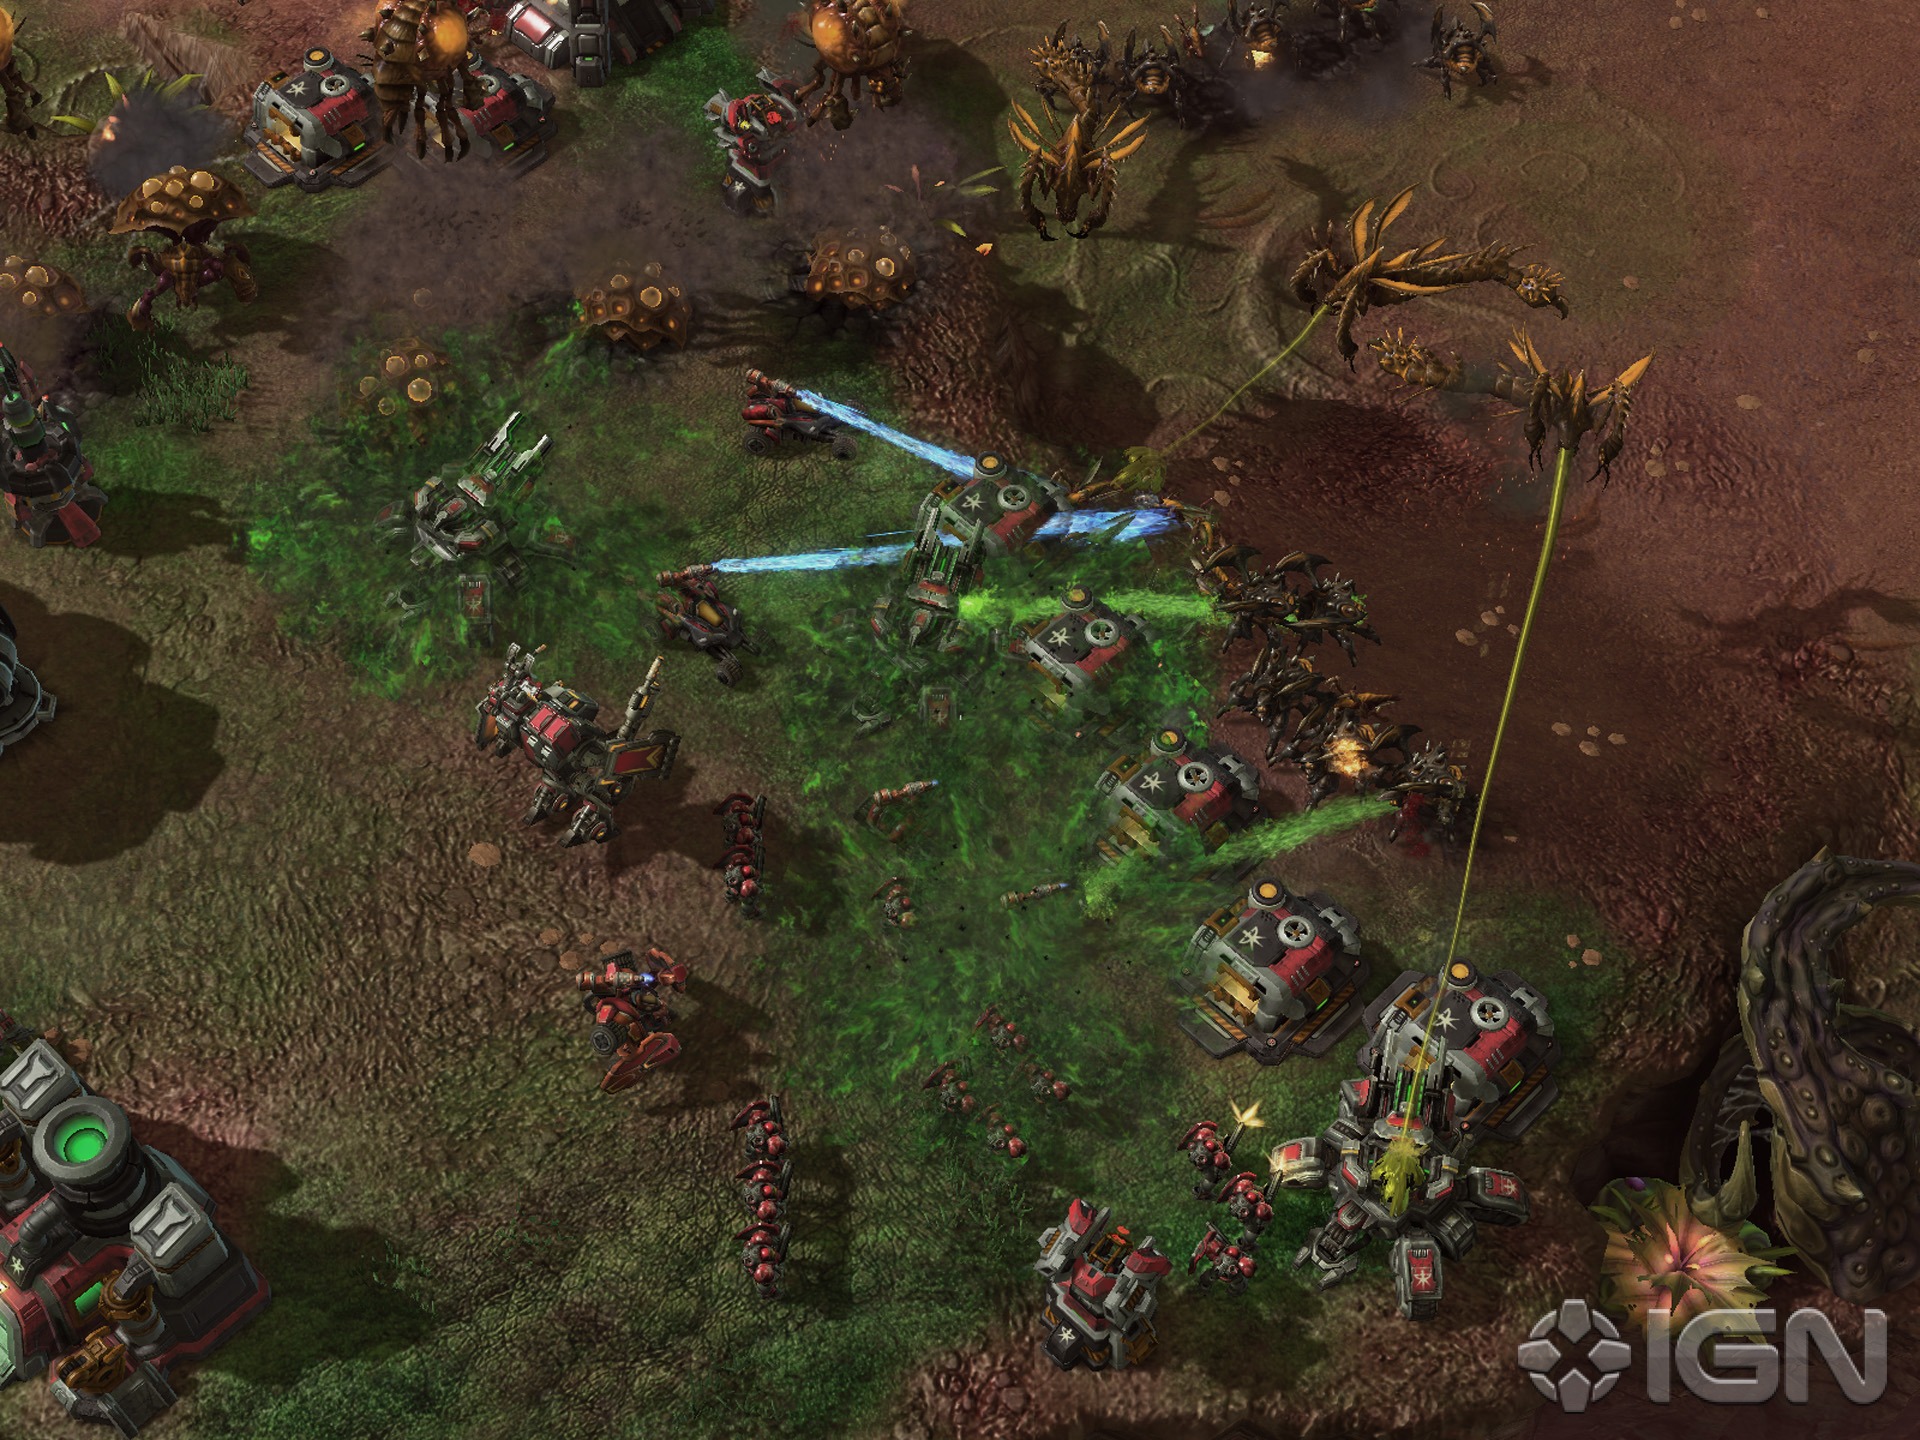  Starcraft Ii: Heart Of The Swarm Cellphone FHD pic